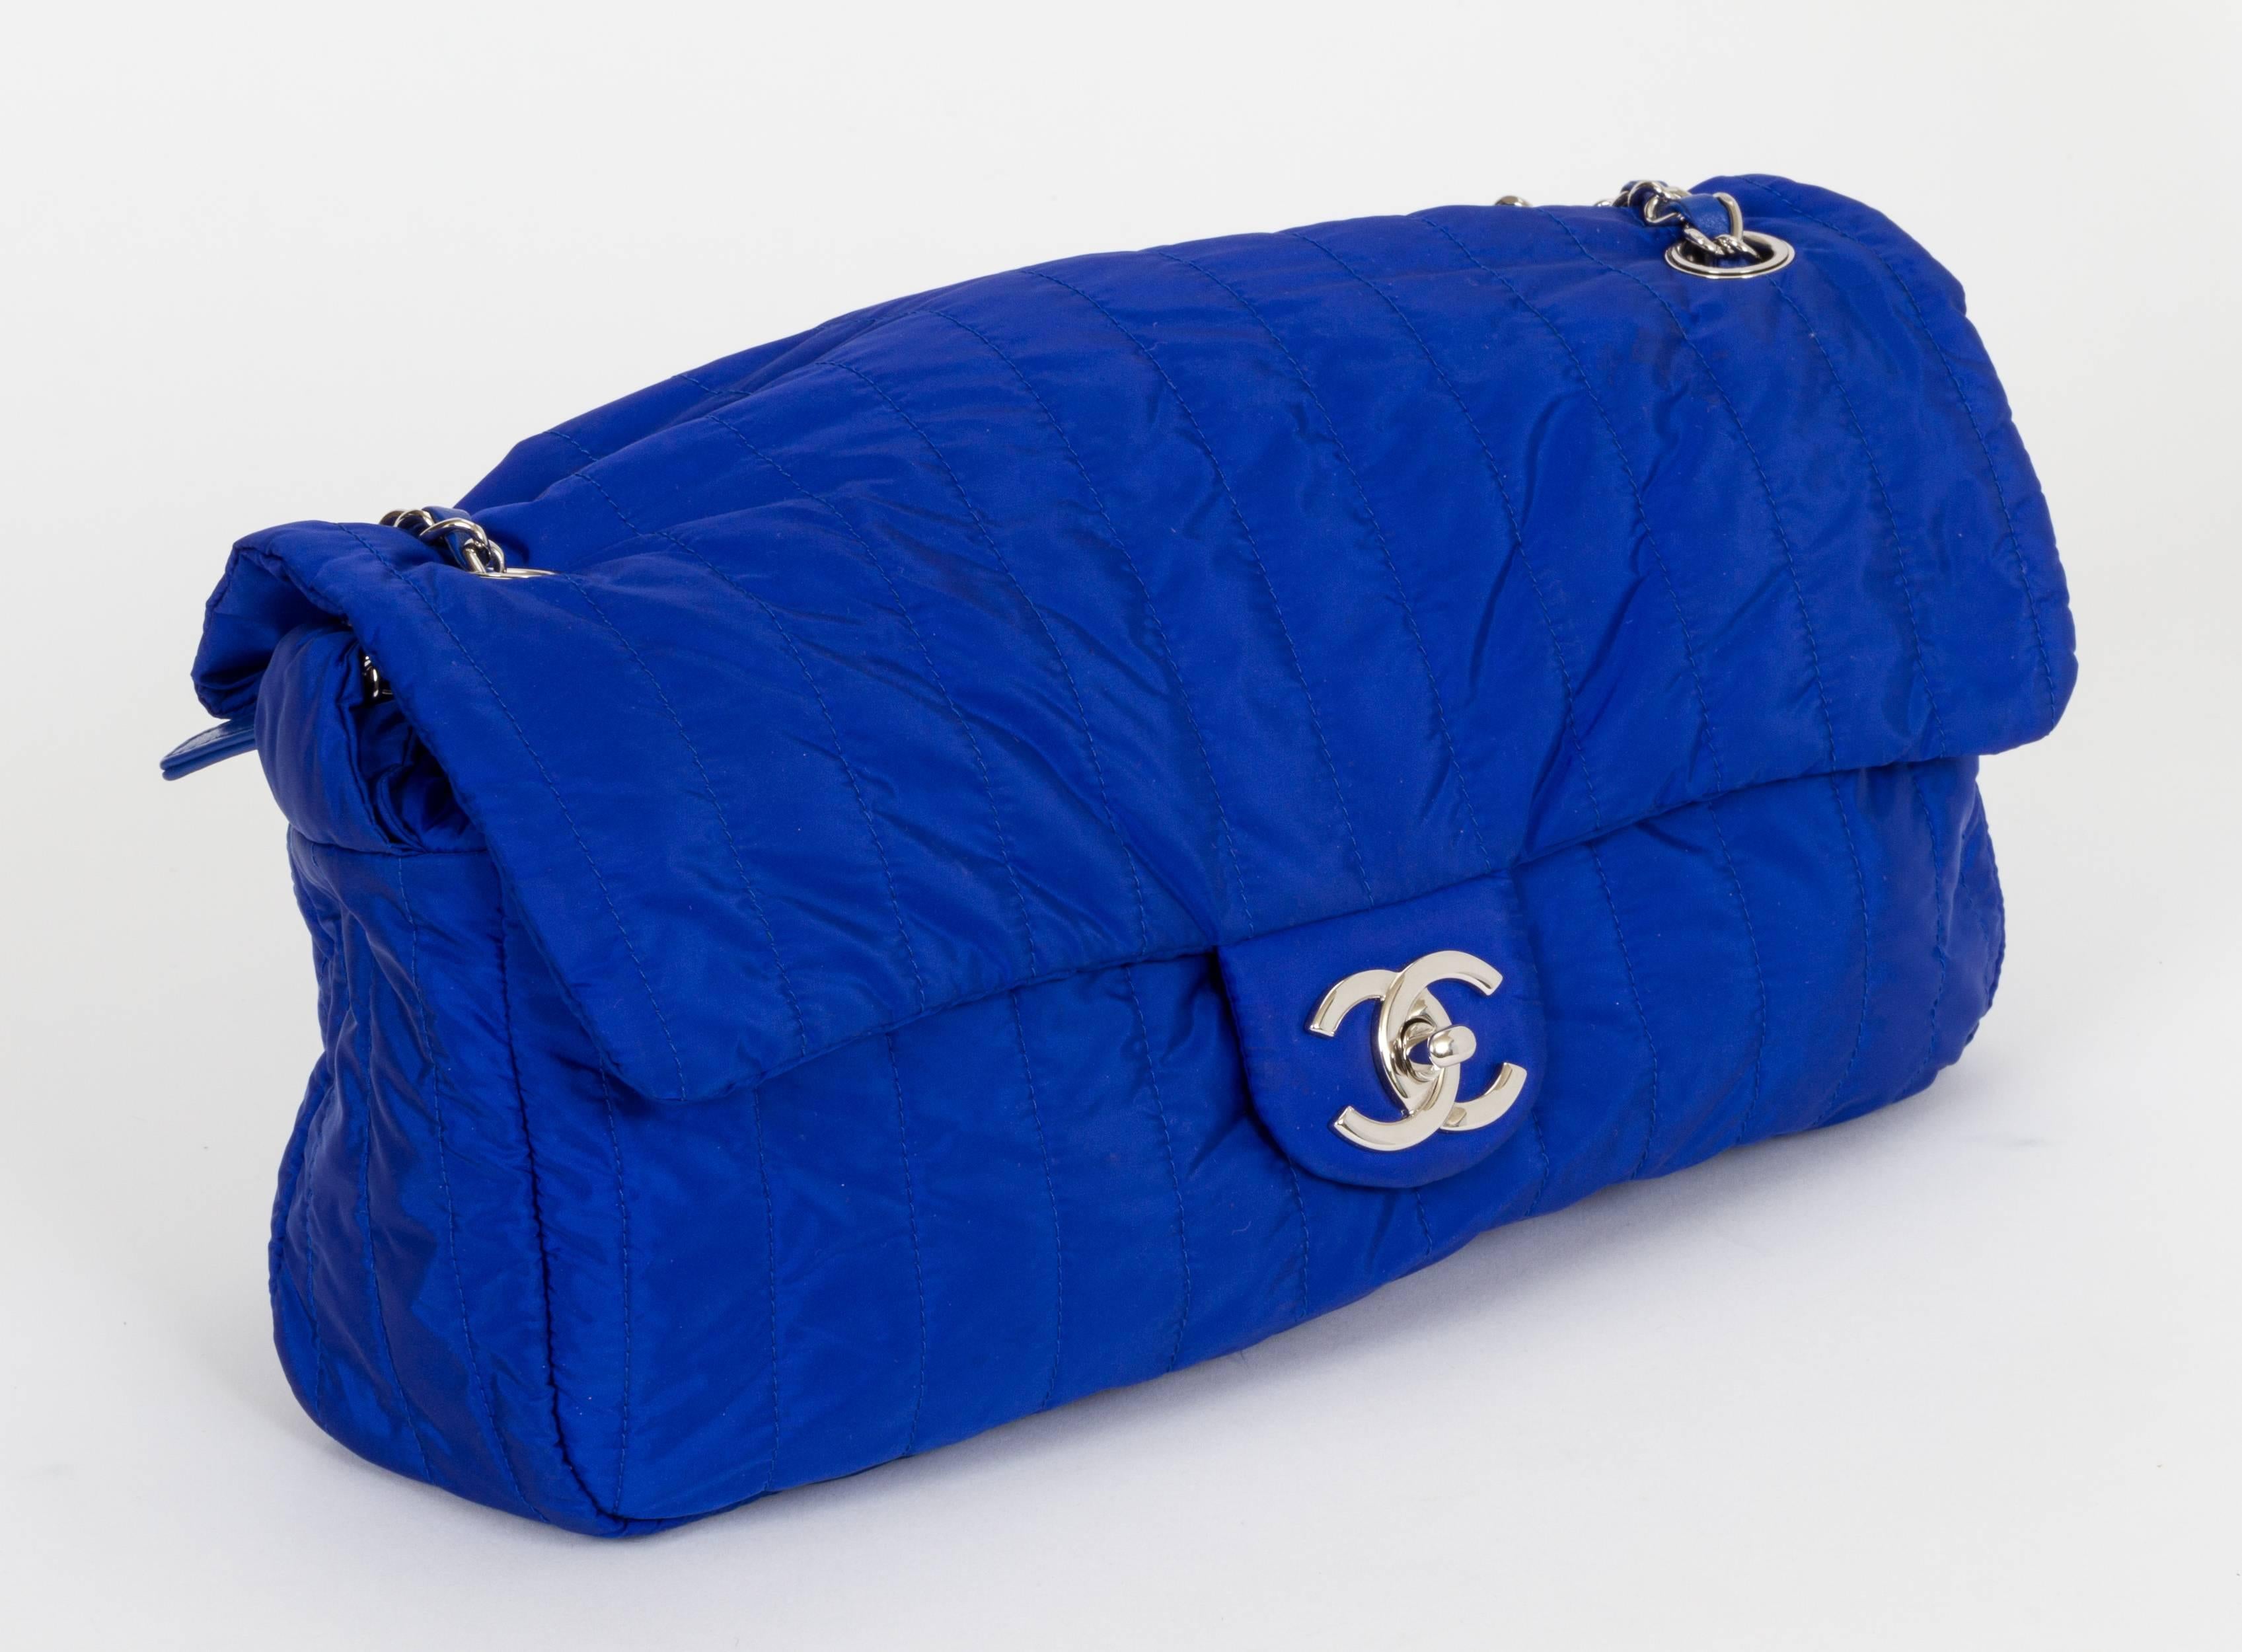 Chanel electric blue soft nylon jumbo bag with matching pouchette. Comes with original box. Pouchette, 10